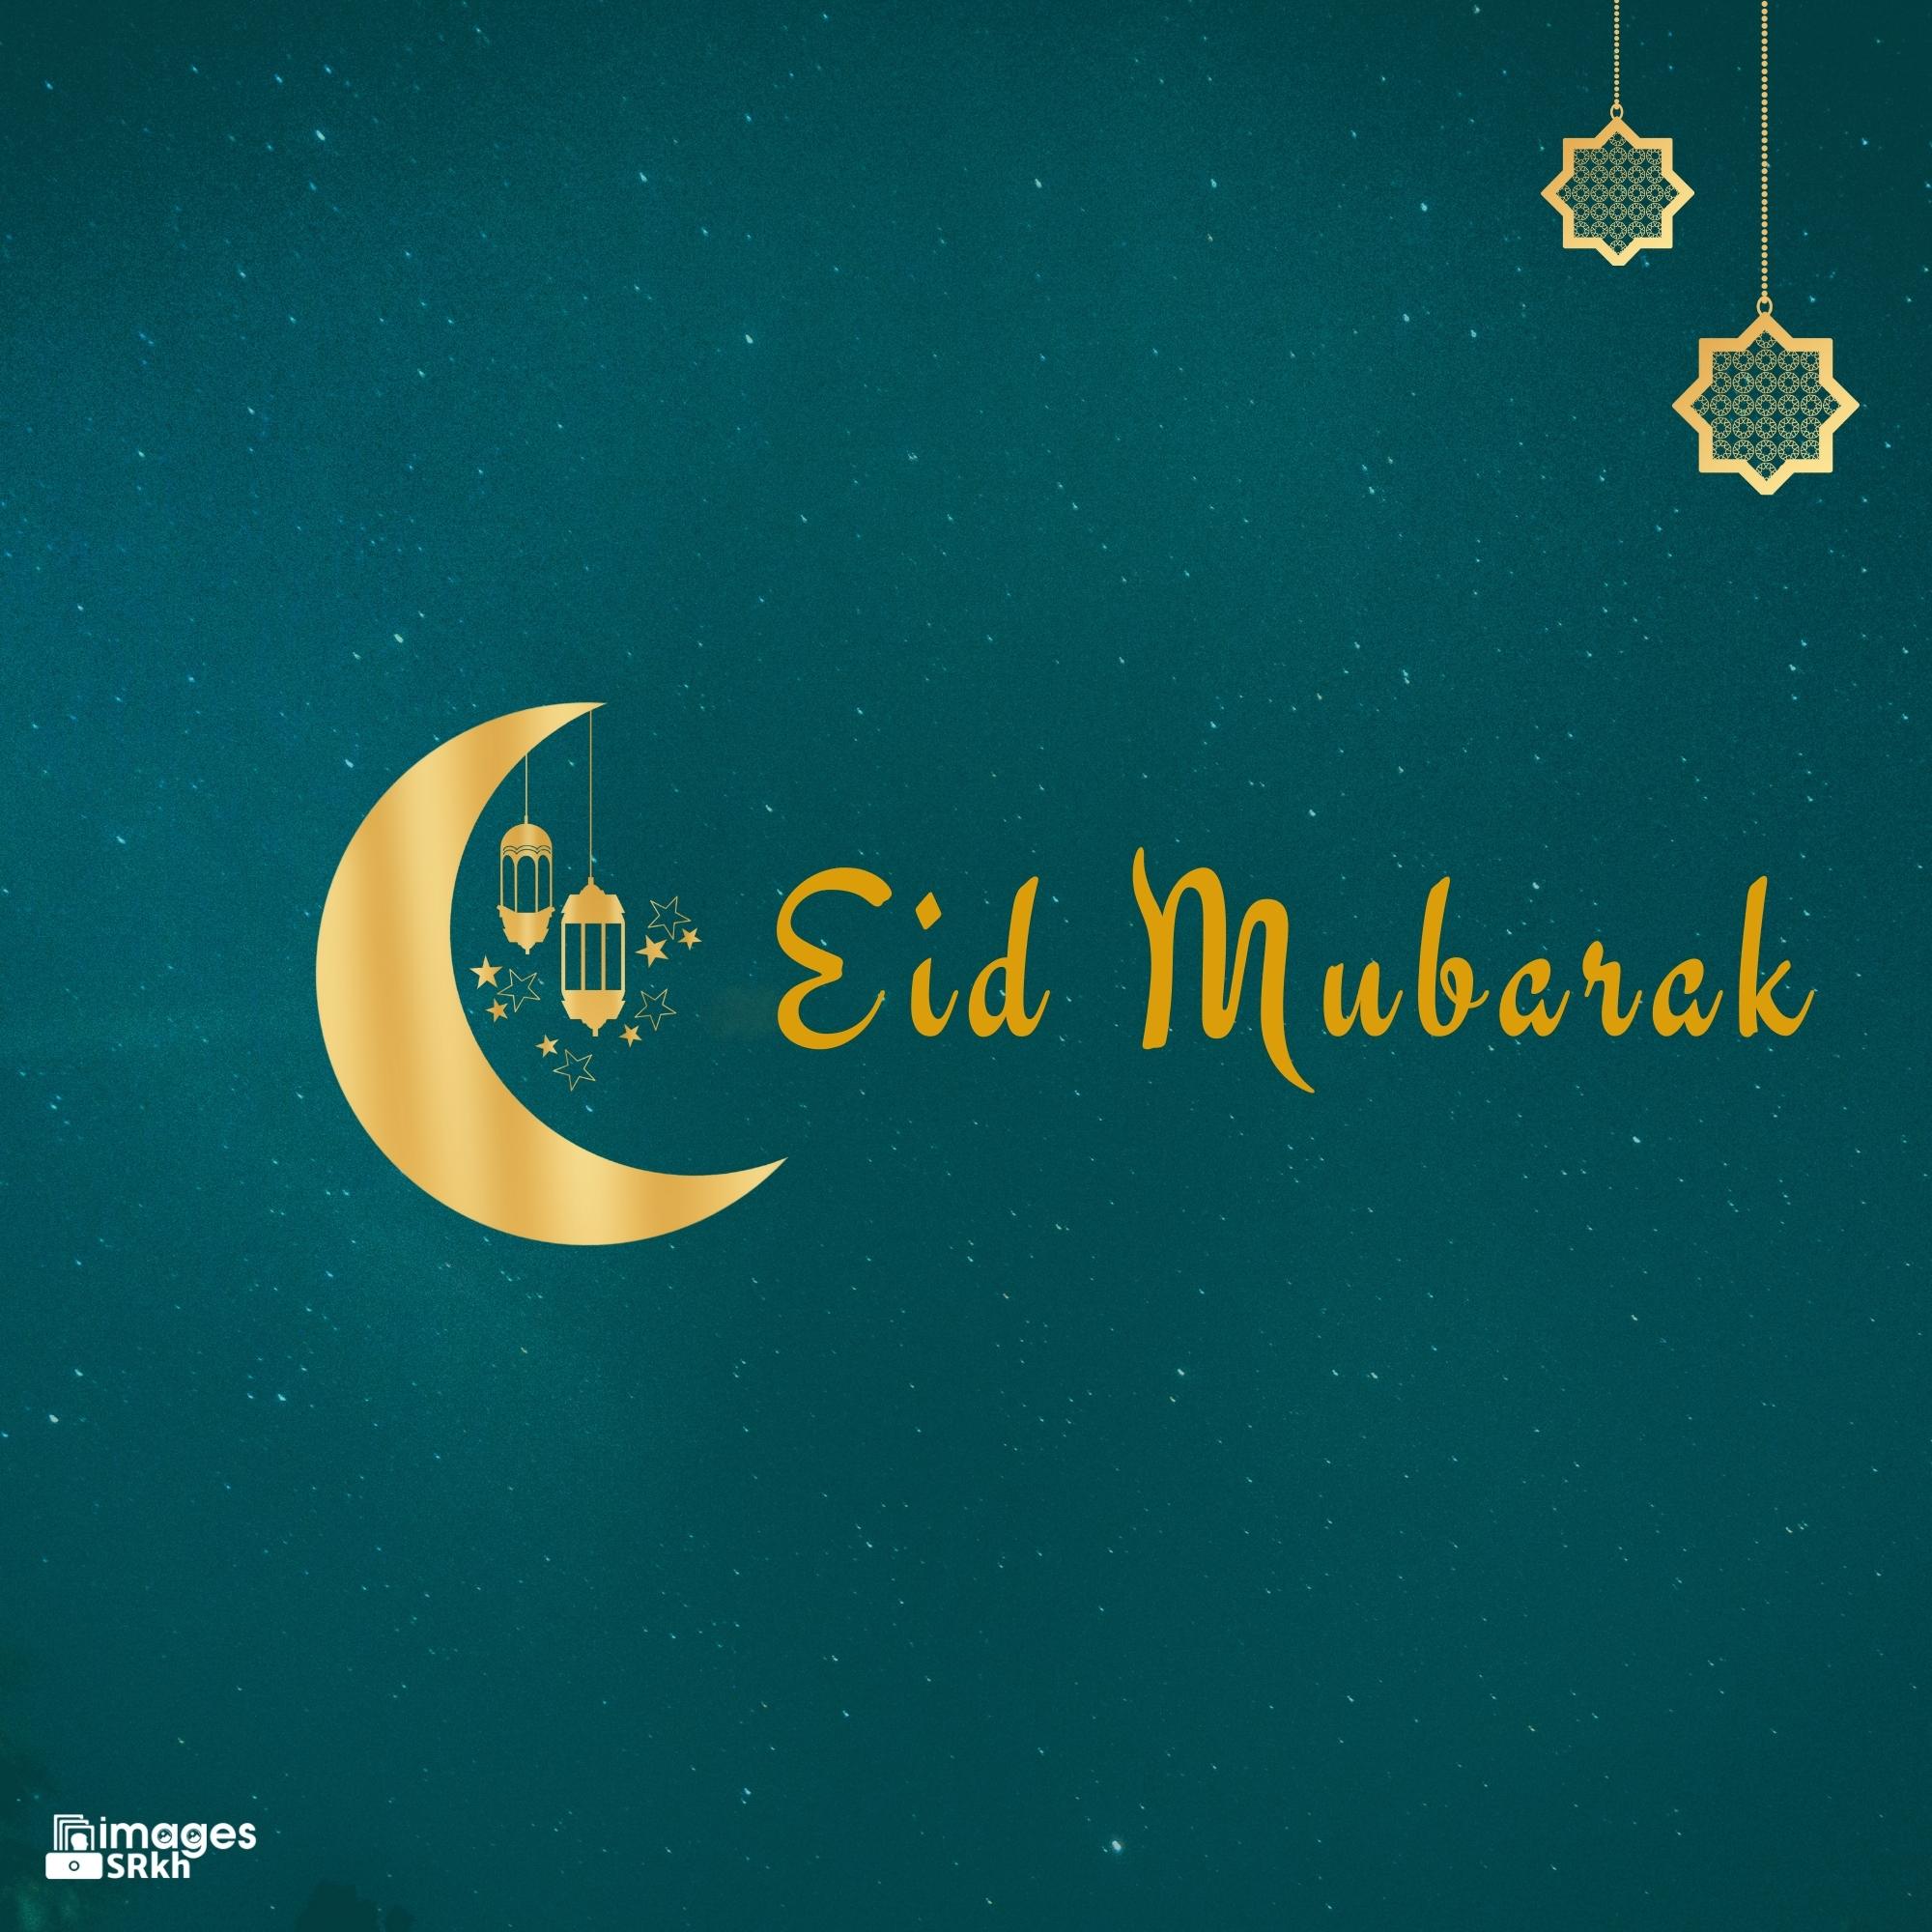 Pictures Eid Mubarak (7) | Download free in Hd Quality | imagesSRkh